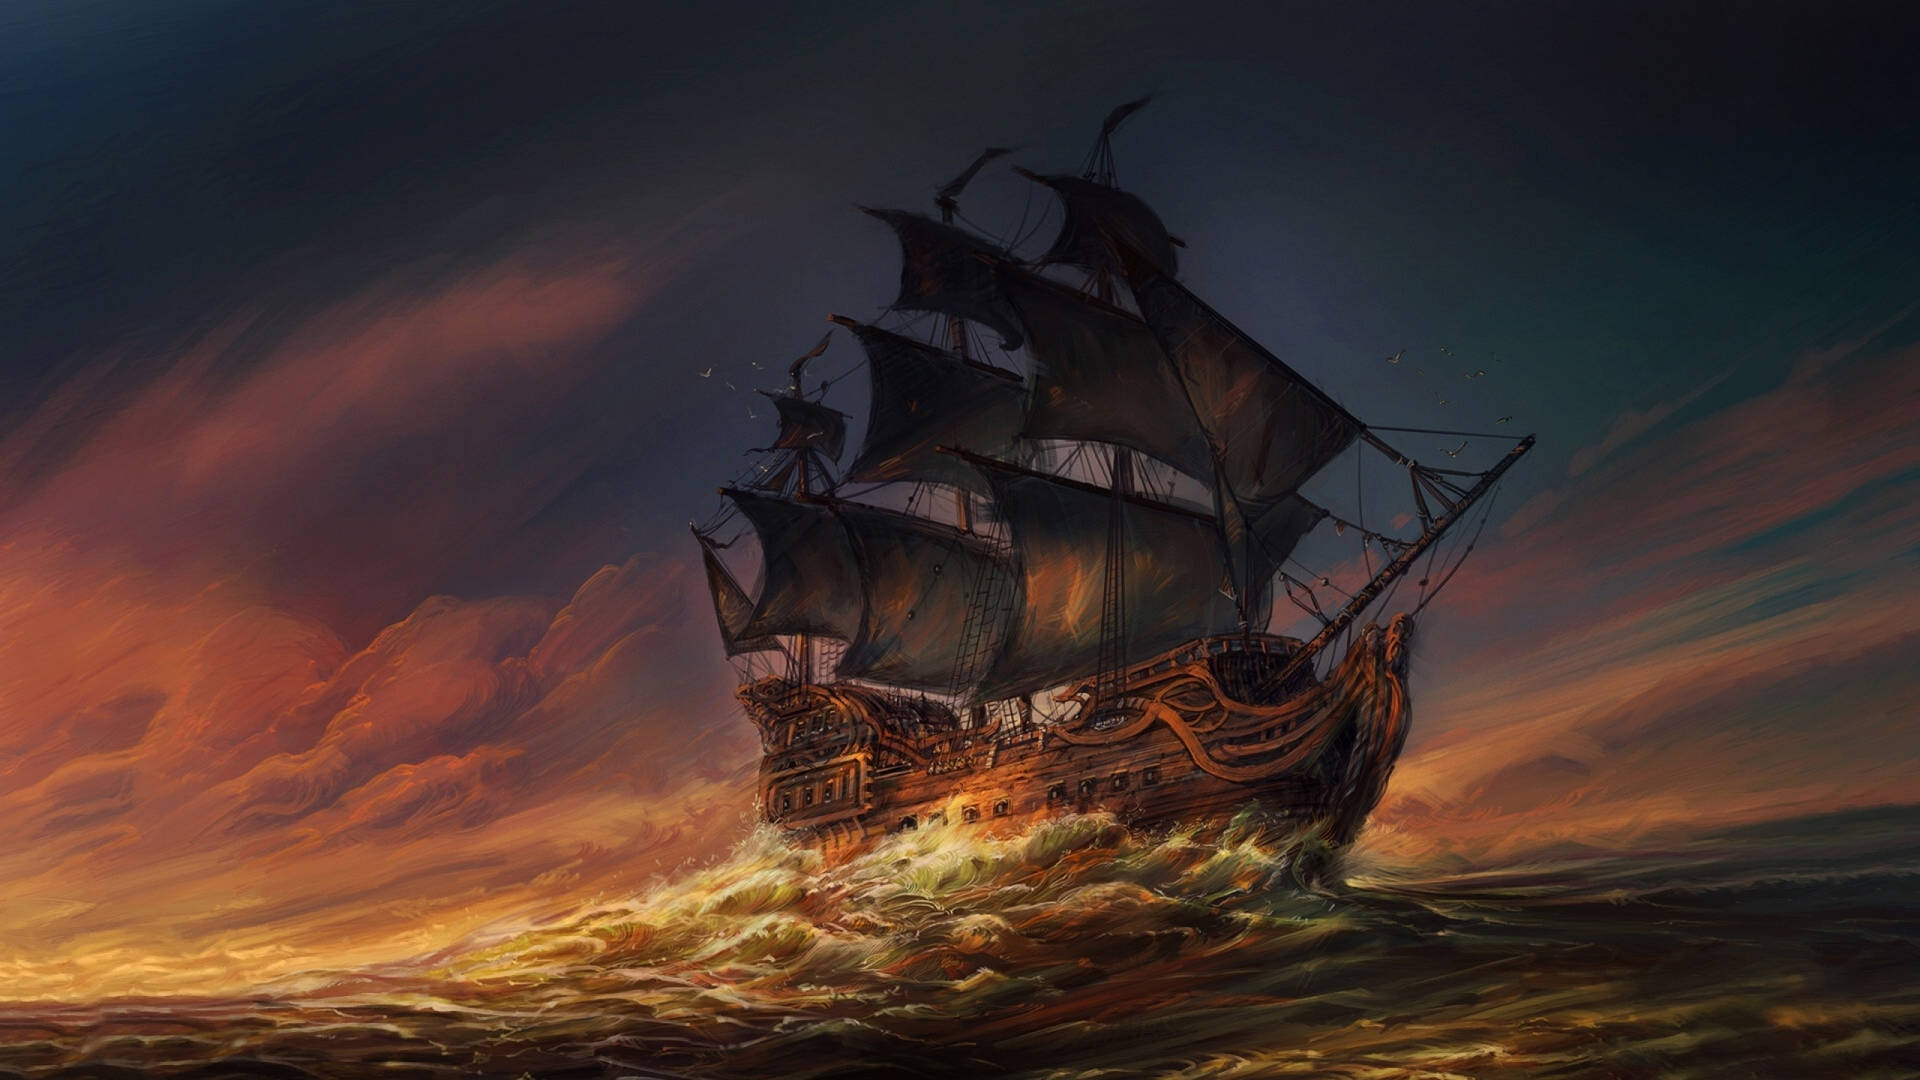 1920x1080 Download Pirate Ship Painting Wallpaper